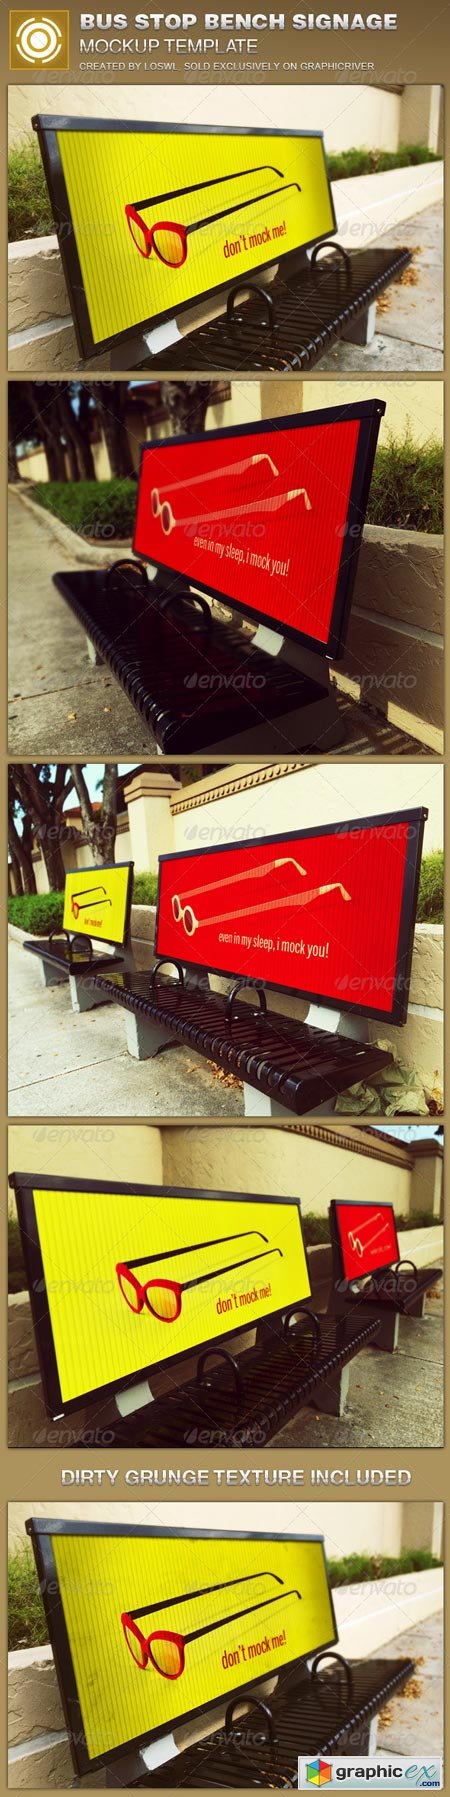 Corrugated Bus Stop Bench Signage Mockup Template 8688819